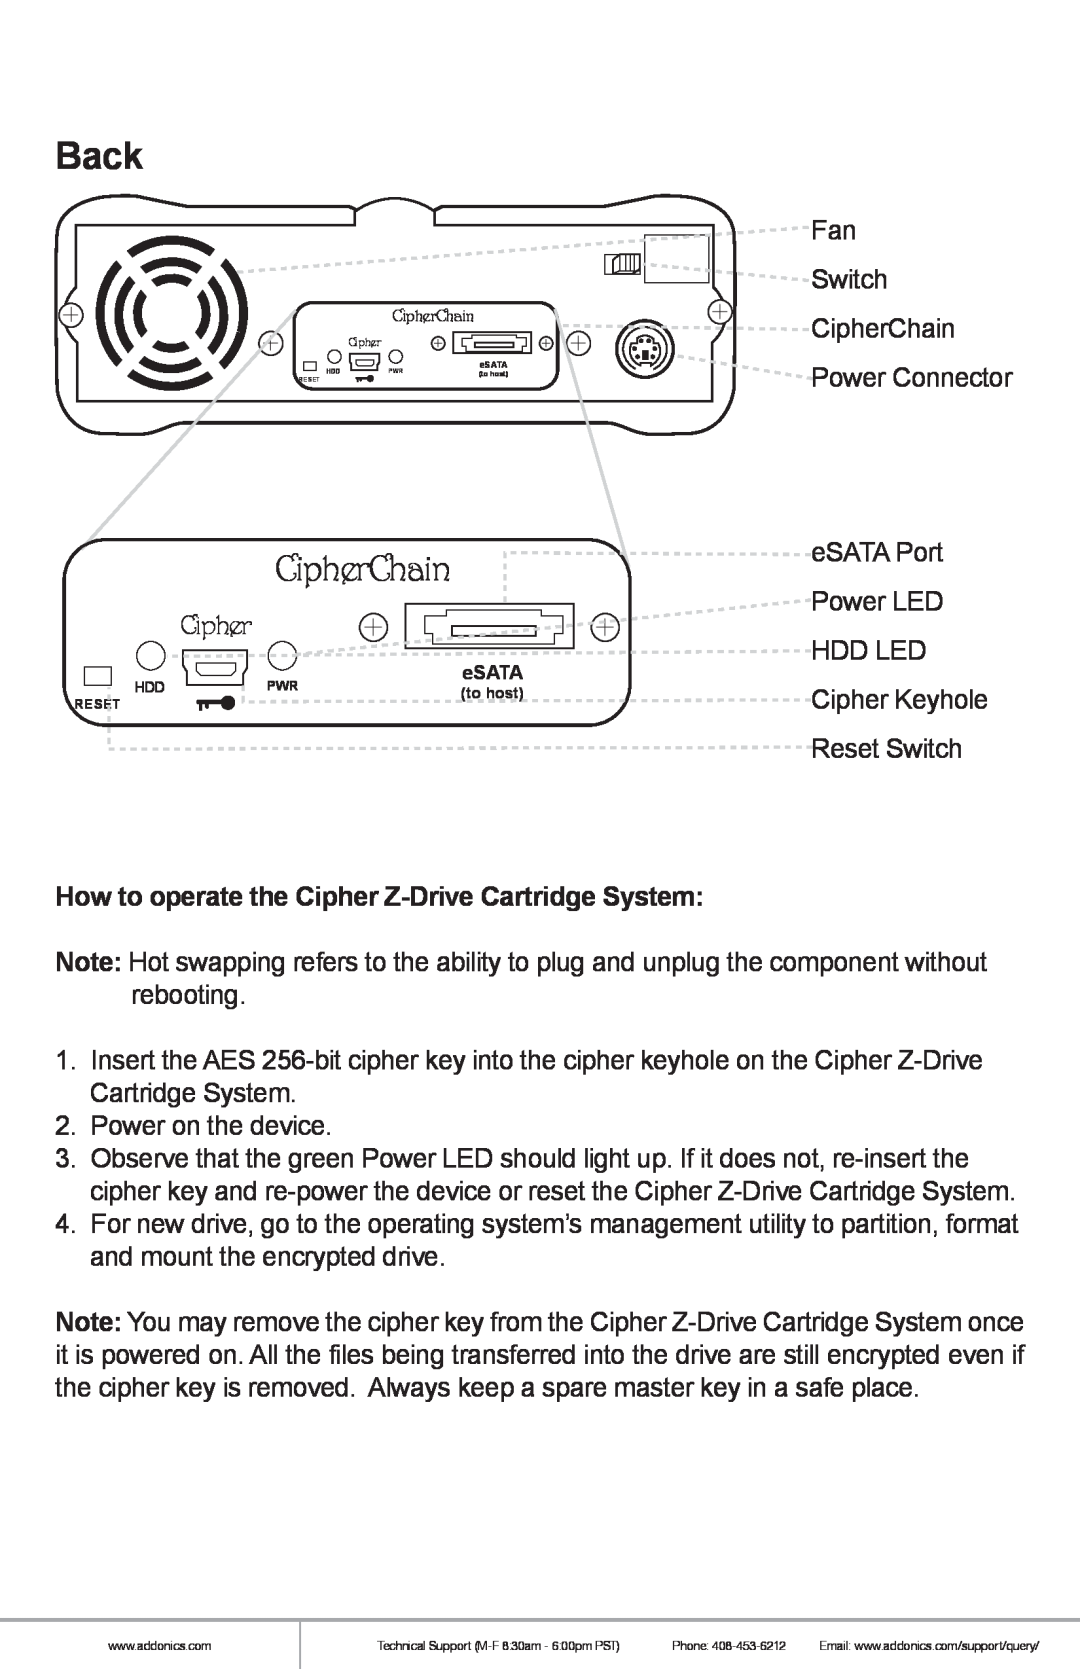 Addonics Technologies ZSNA256EU, ZSNAES256 manual Back, How to operate the Cipher Z-Drive Cartridge System, CipherChain 